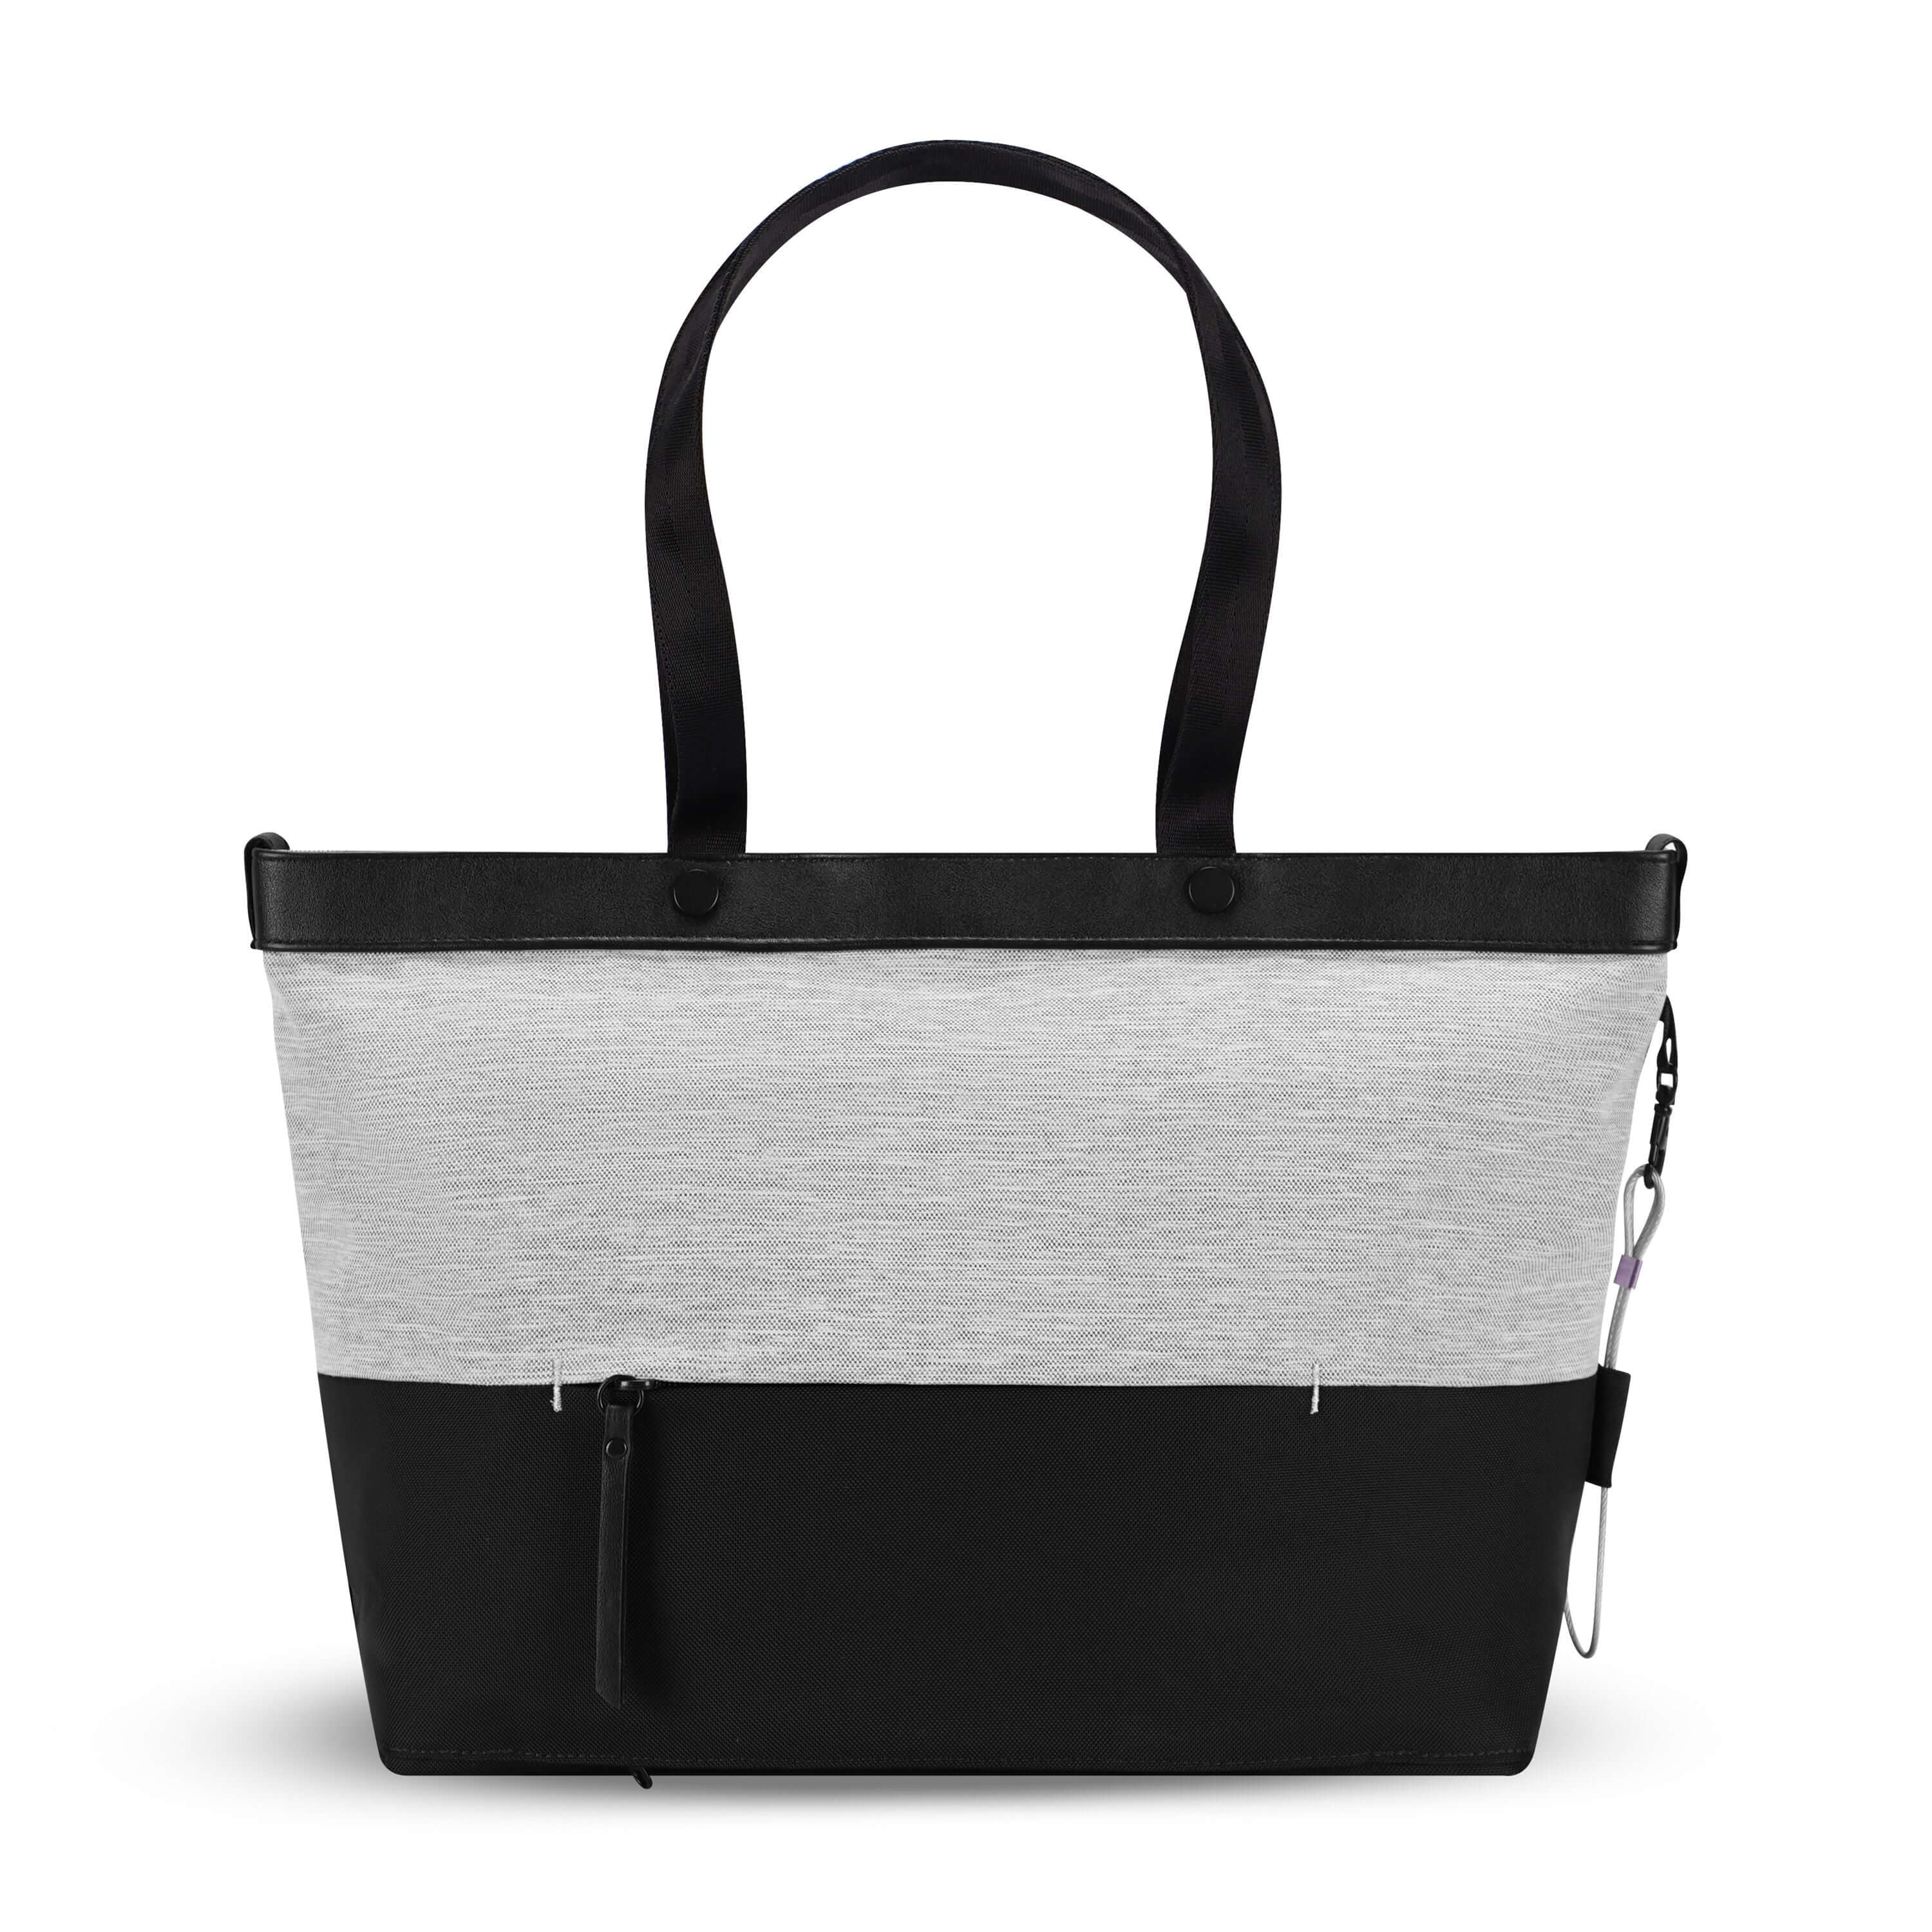 Back view of Sherpani&#39;s Anti-Theft tote, the Cali AT in Sterling, with vegan leather accents in black. There is a zipper compartment that acts as a luggage pass-through or trolley sleve, and a chair loop lock on one side that is secured by an elastic tab.